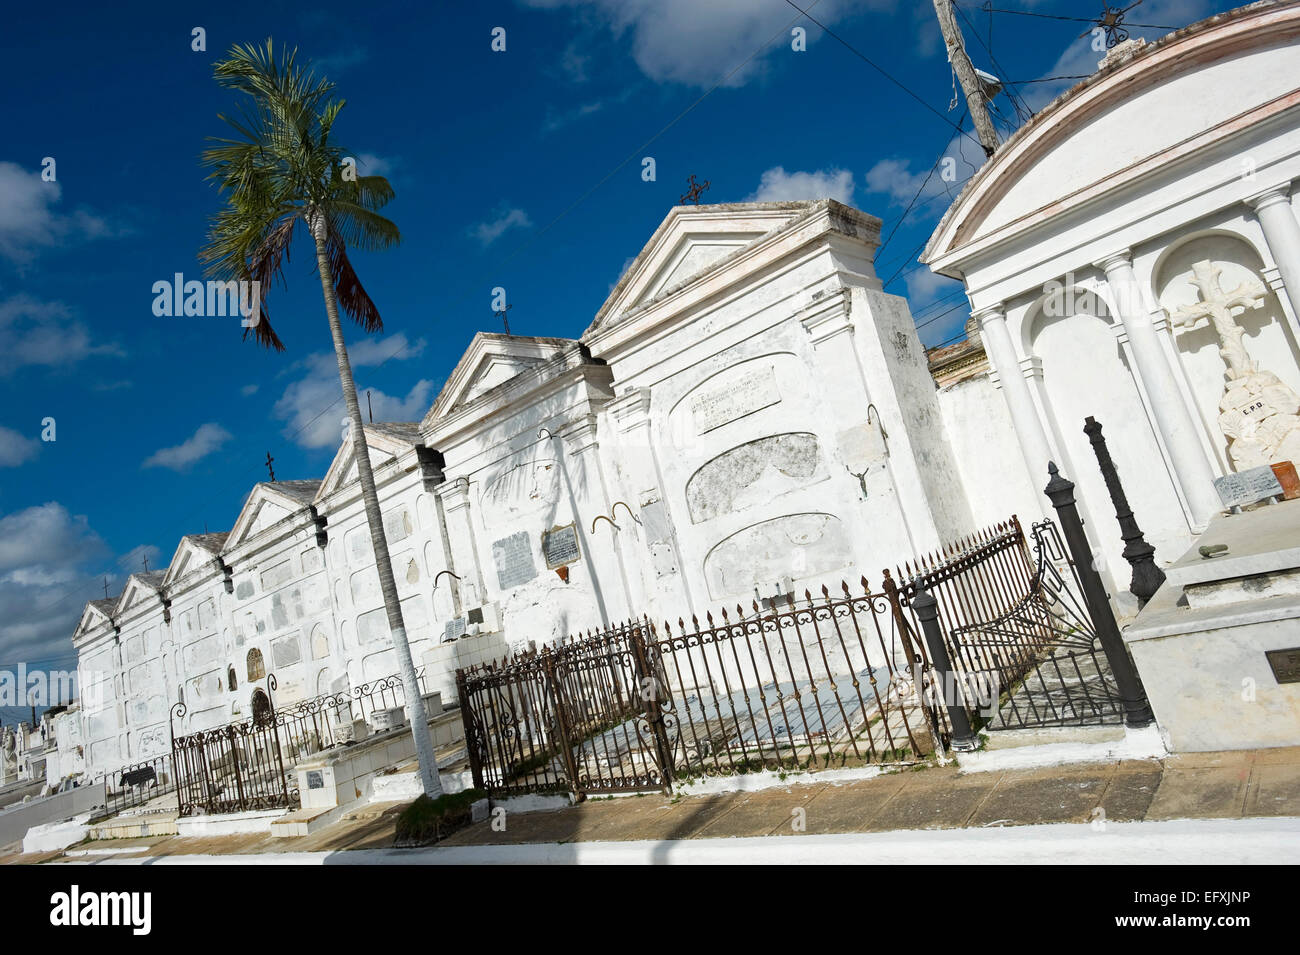 Horizontal view of the General cemetery in Camaguey, Cuba. Stock Photo